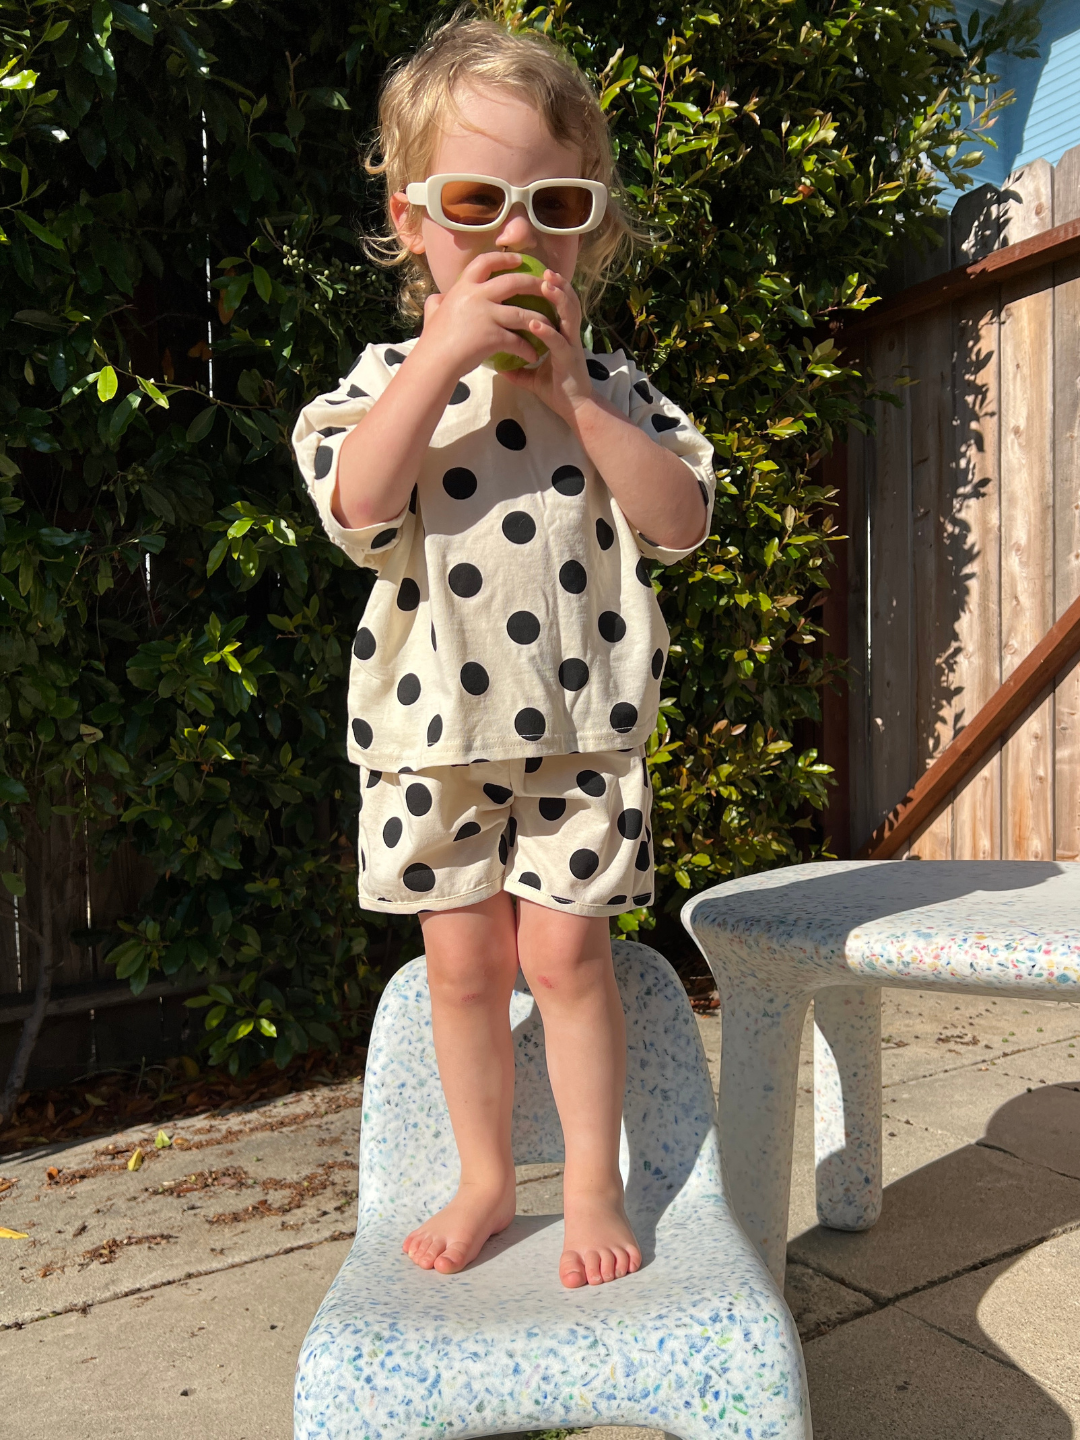  A toddler standing on a chair, wearing a kids' tee shirt and shorts set in a pattern of black dots on an ecru background